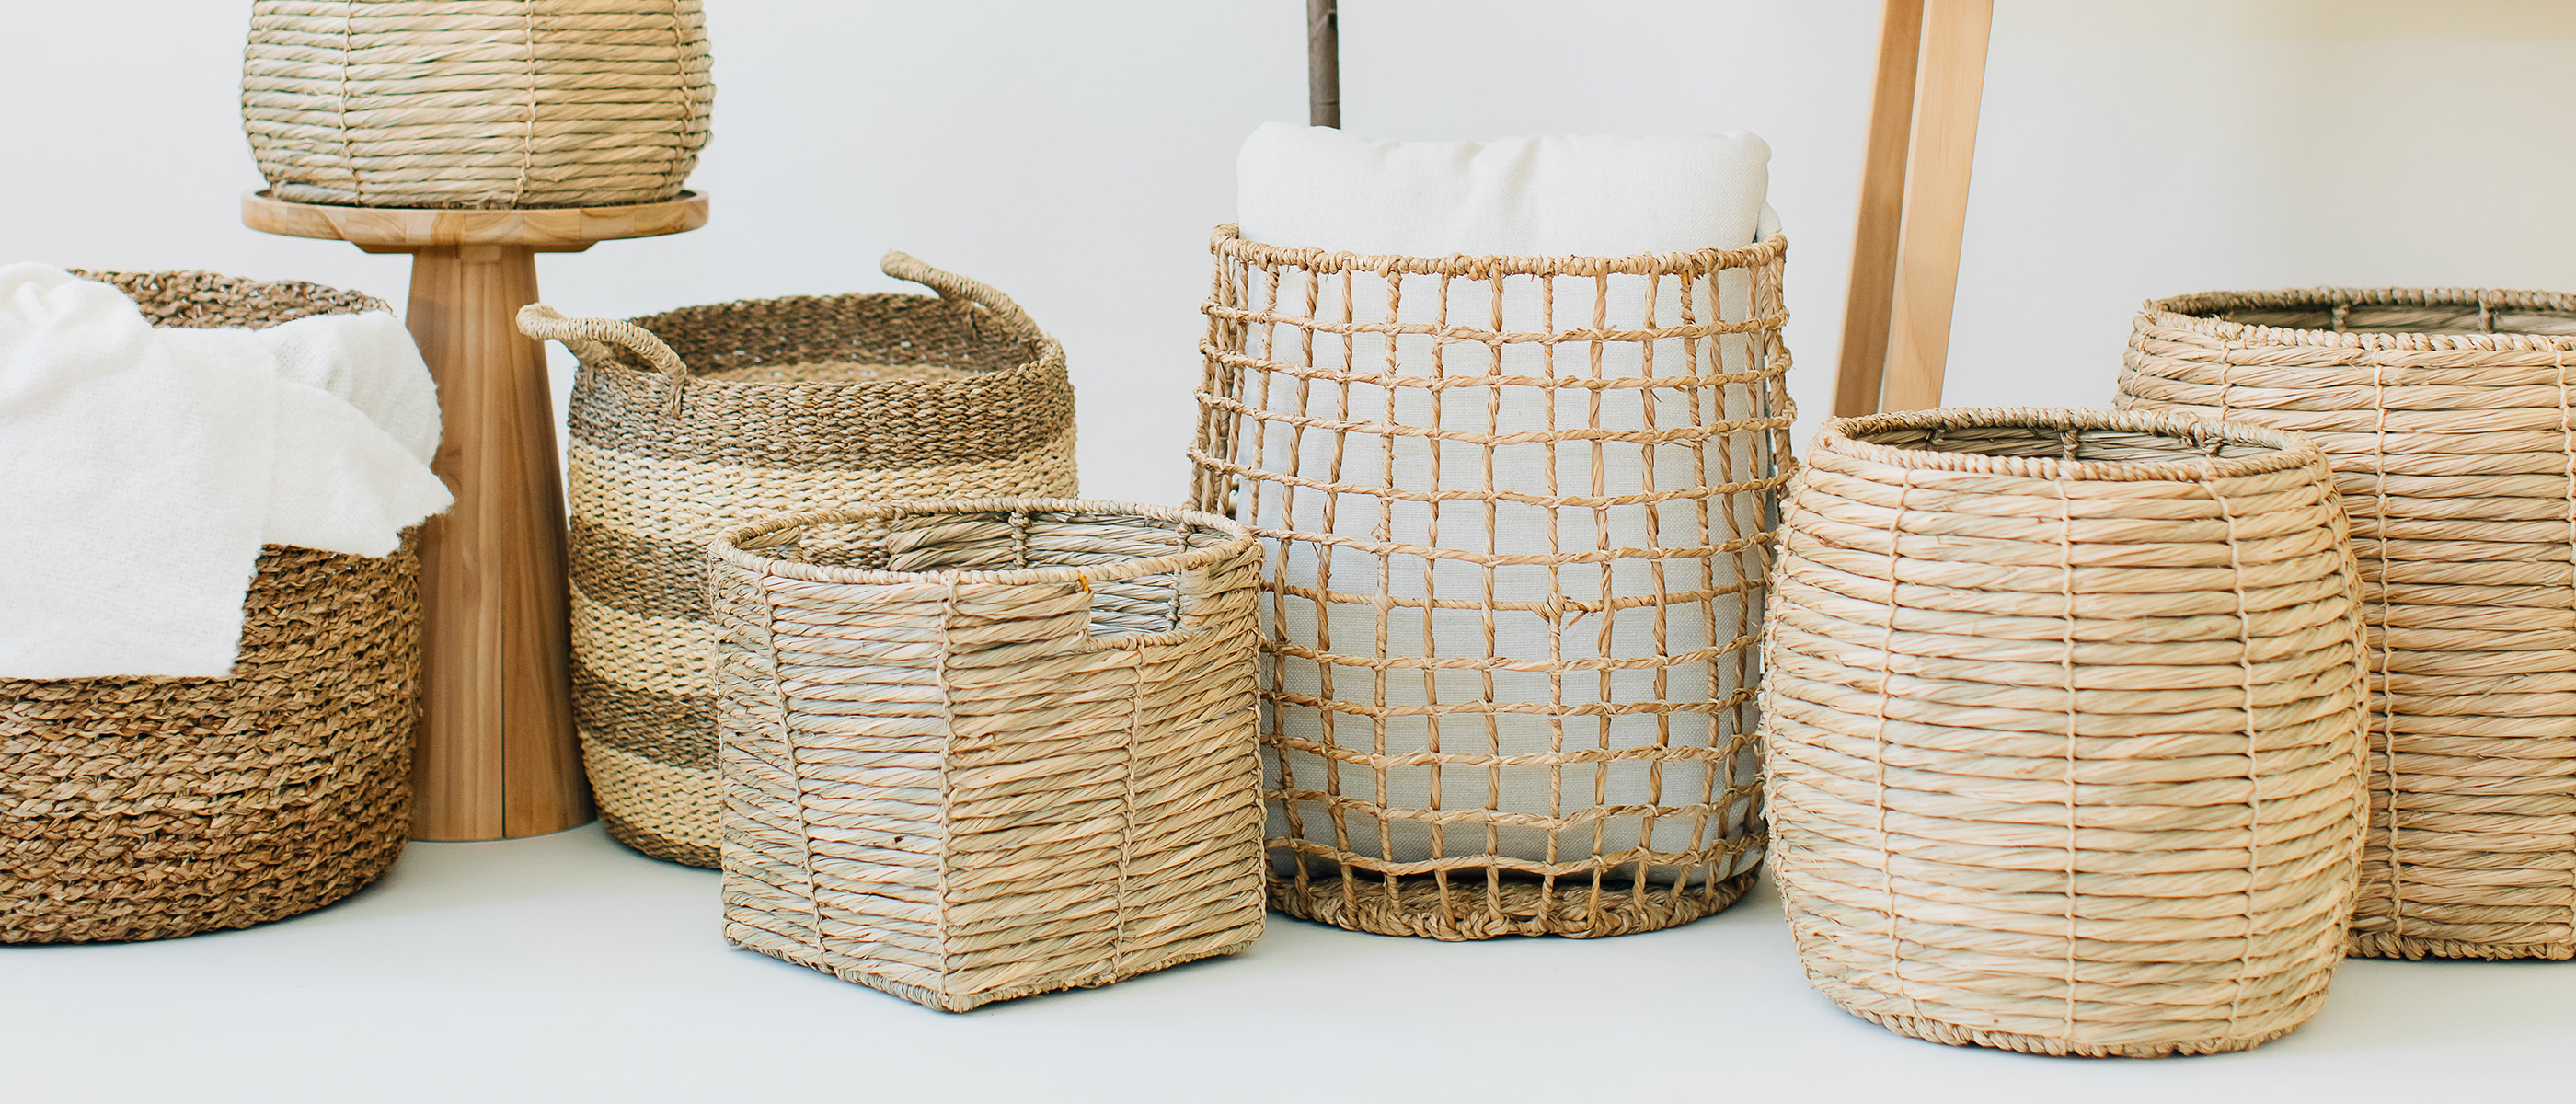 baskets and bins collection hero image |  Made with natural materials from all over the world | texxture home